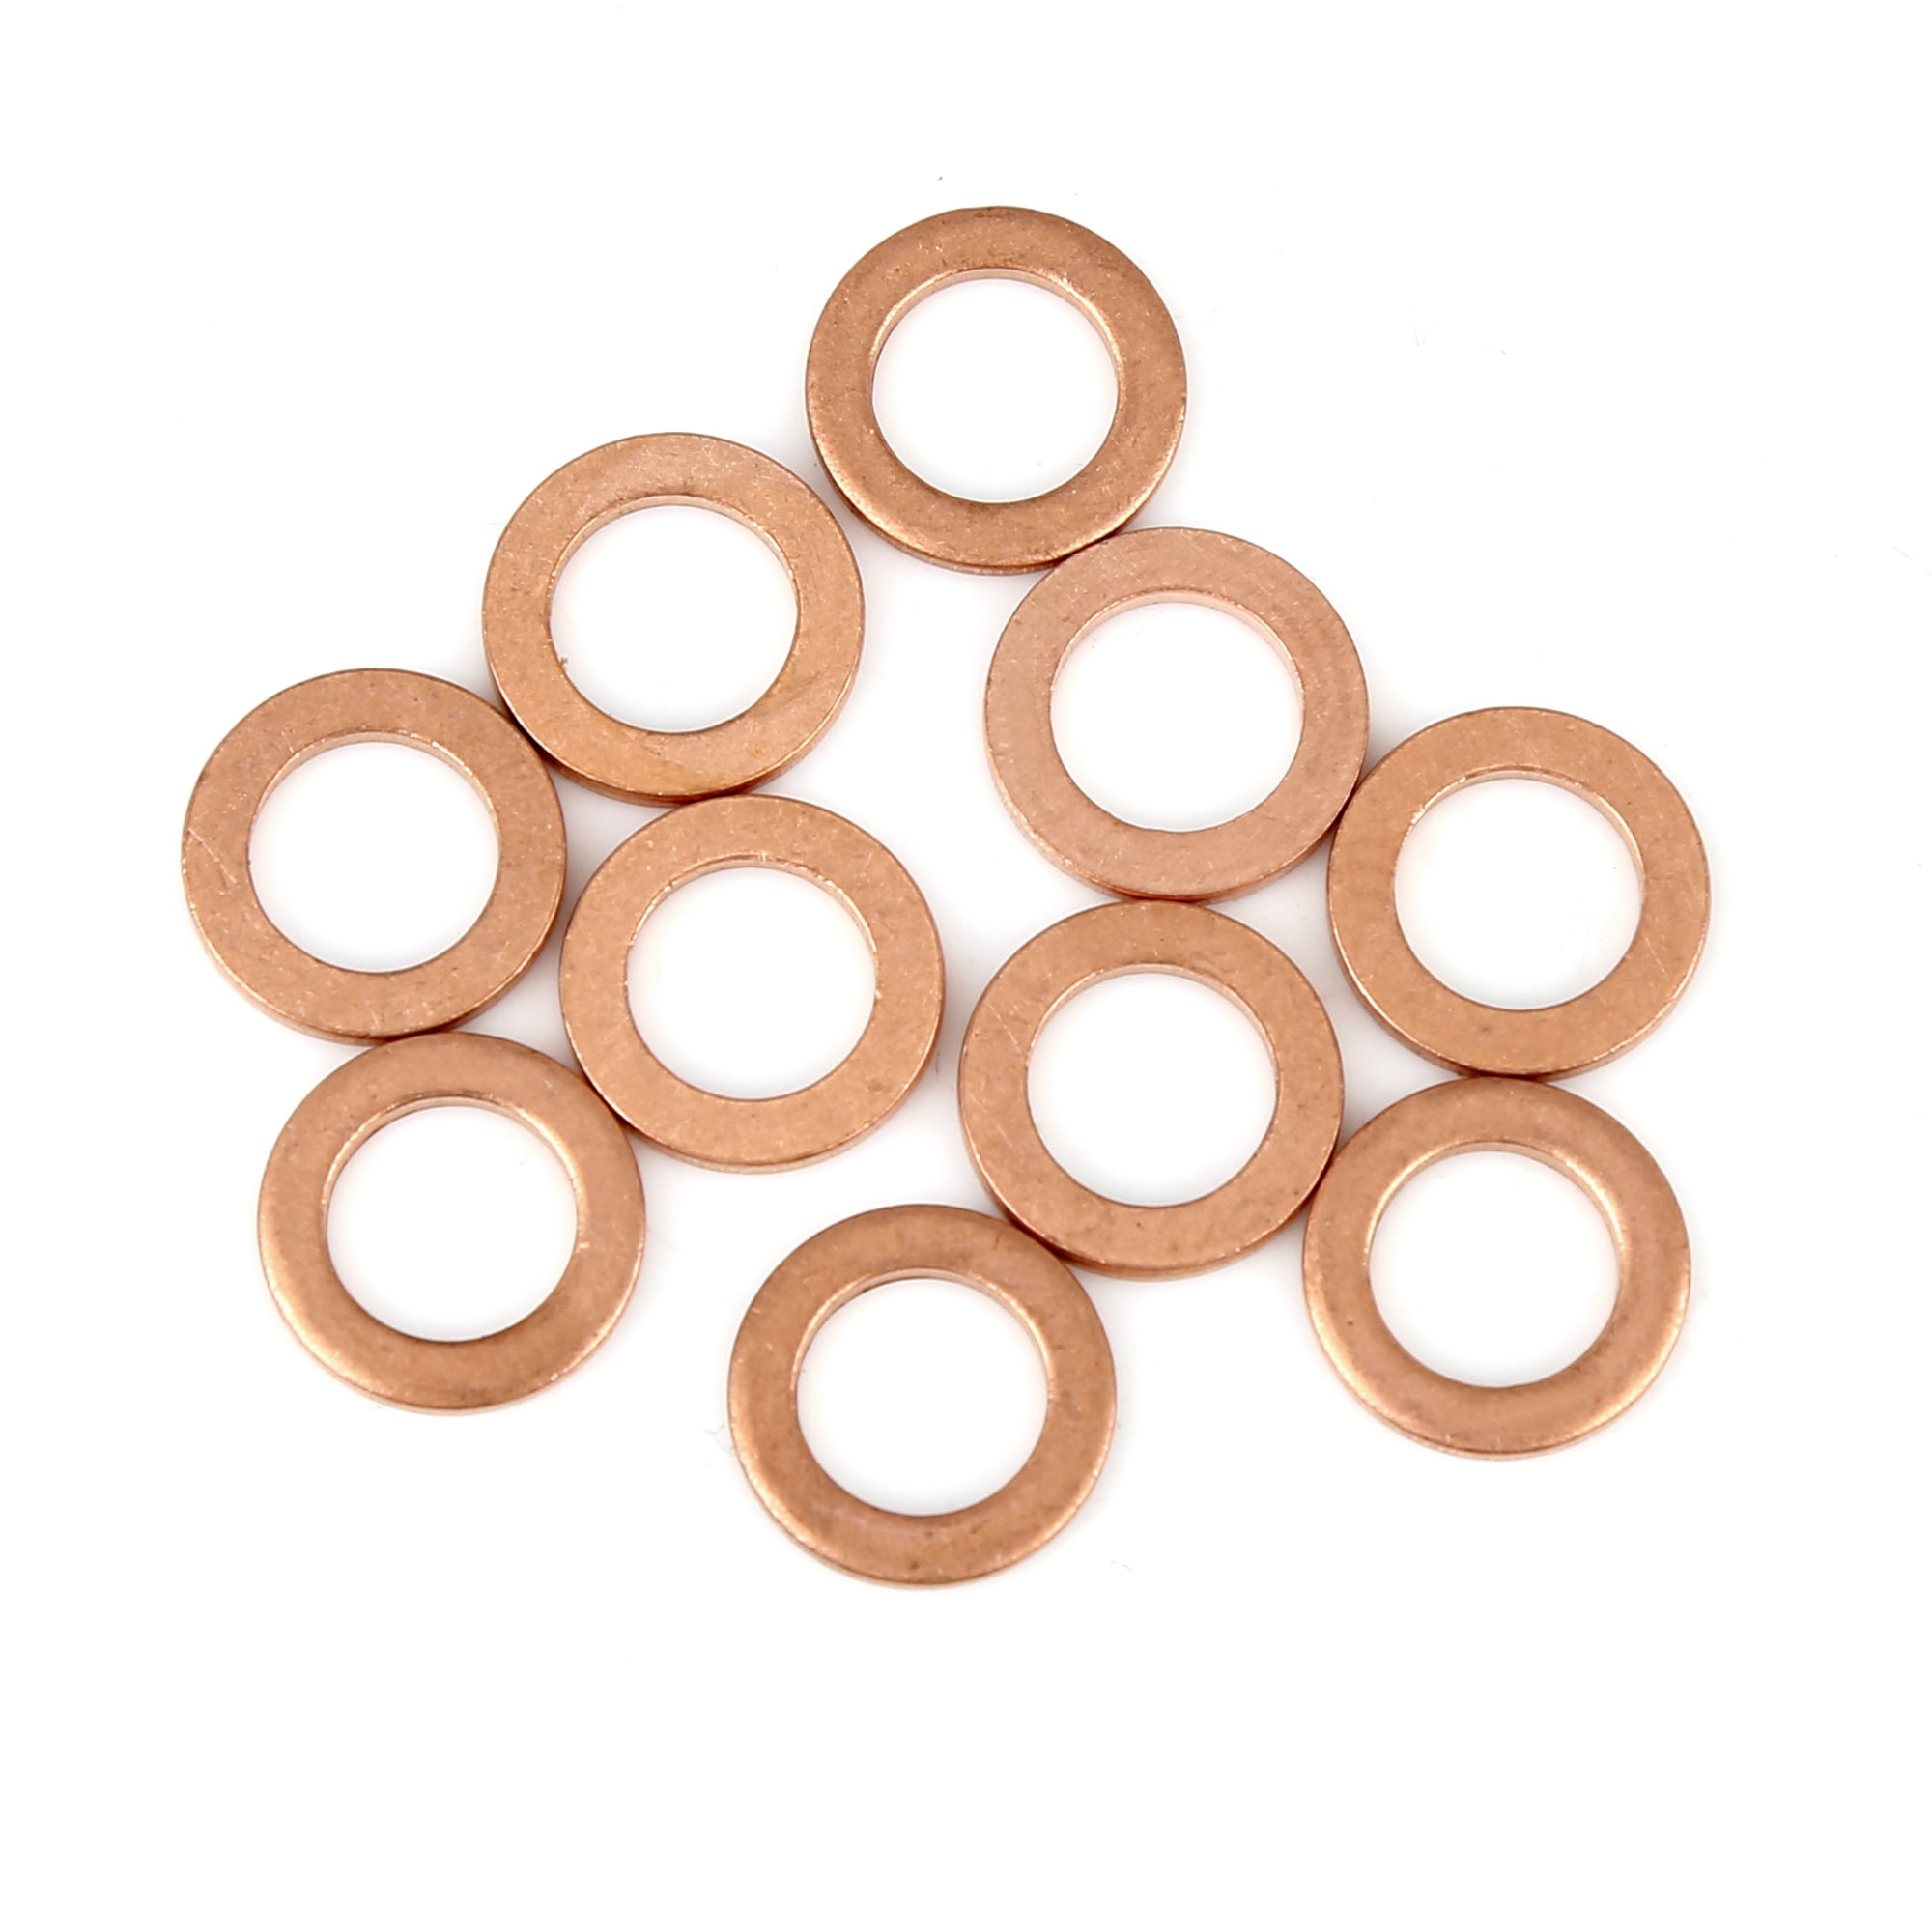 10pcs Sealing Washers Replacement Regulators Gaskets for SodaStream Adapter 